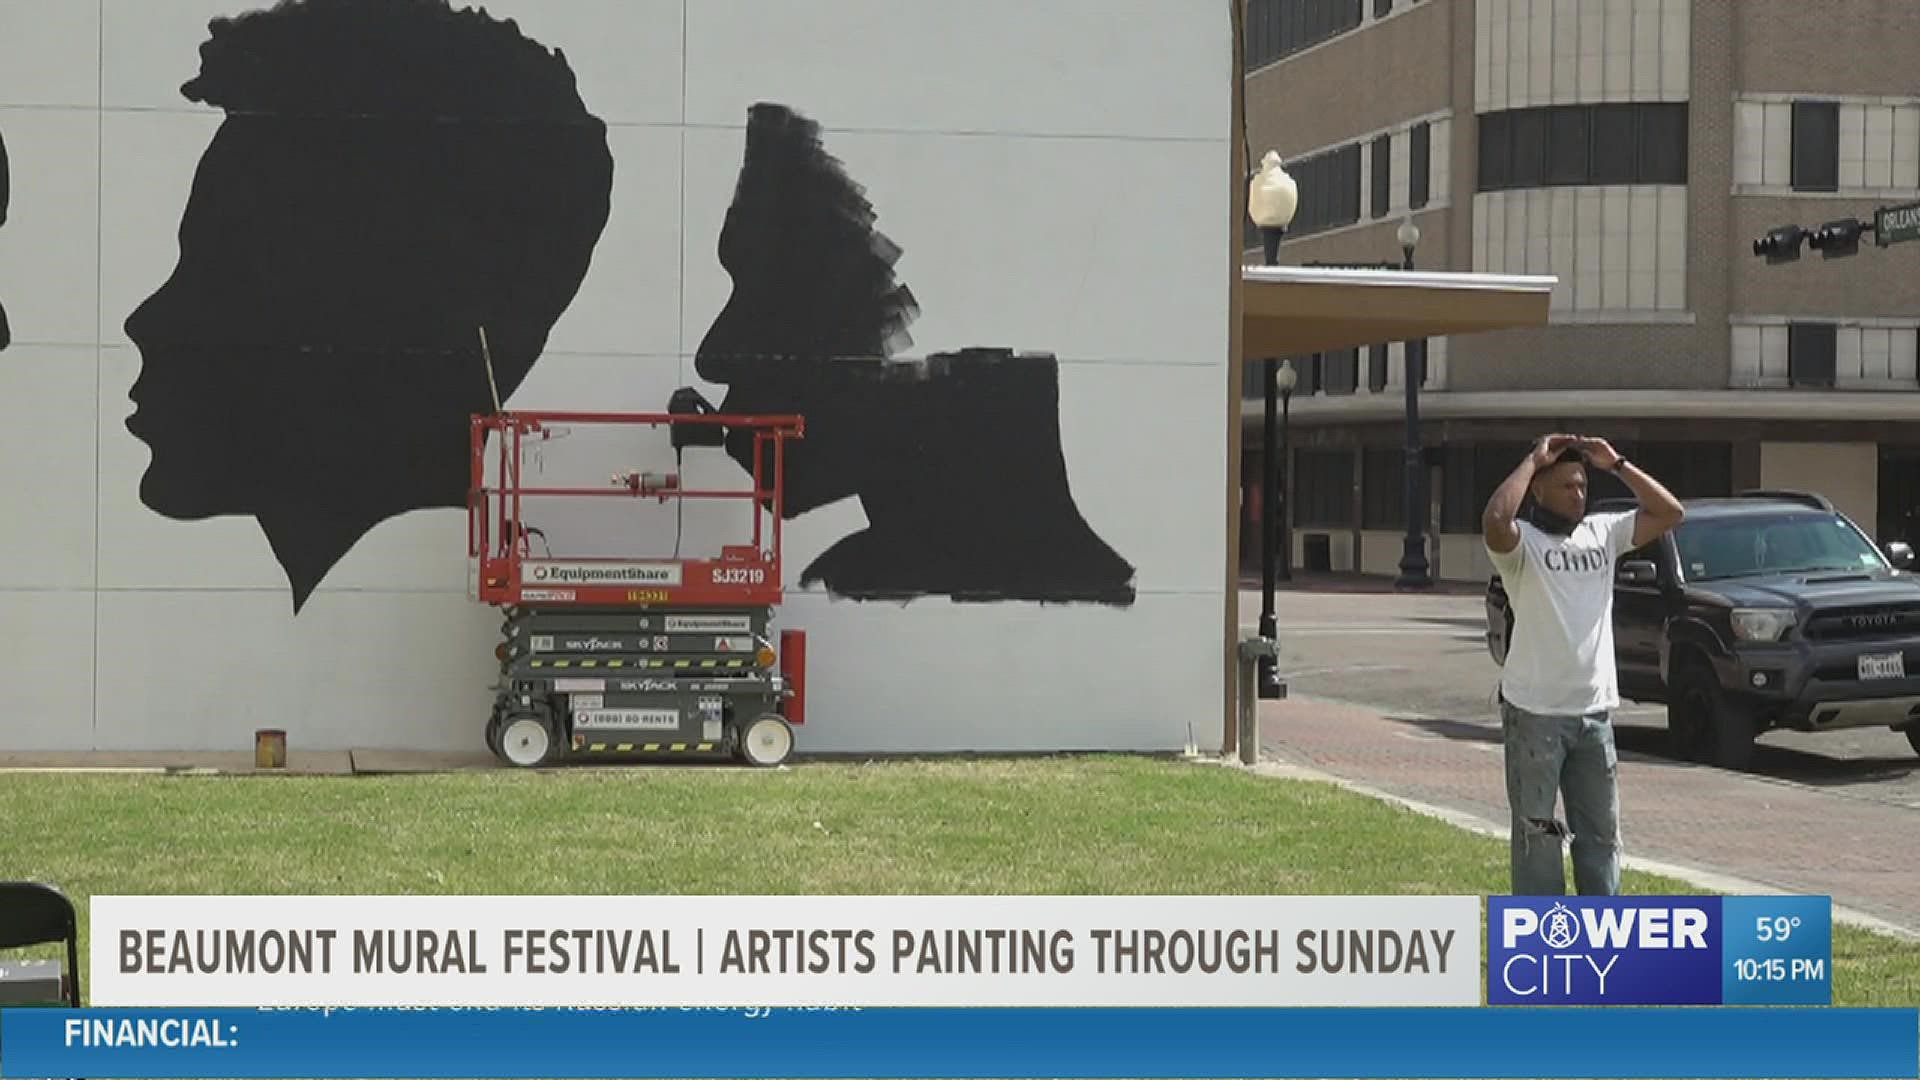 For the first time ever, Beaumont will be hosting a mural festival to further enhance the "flourishing mural scene" around the city.